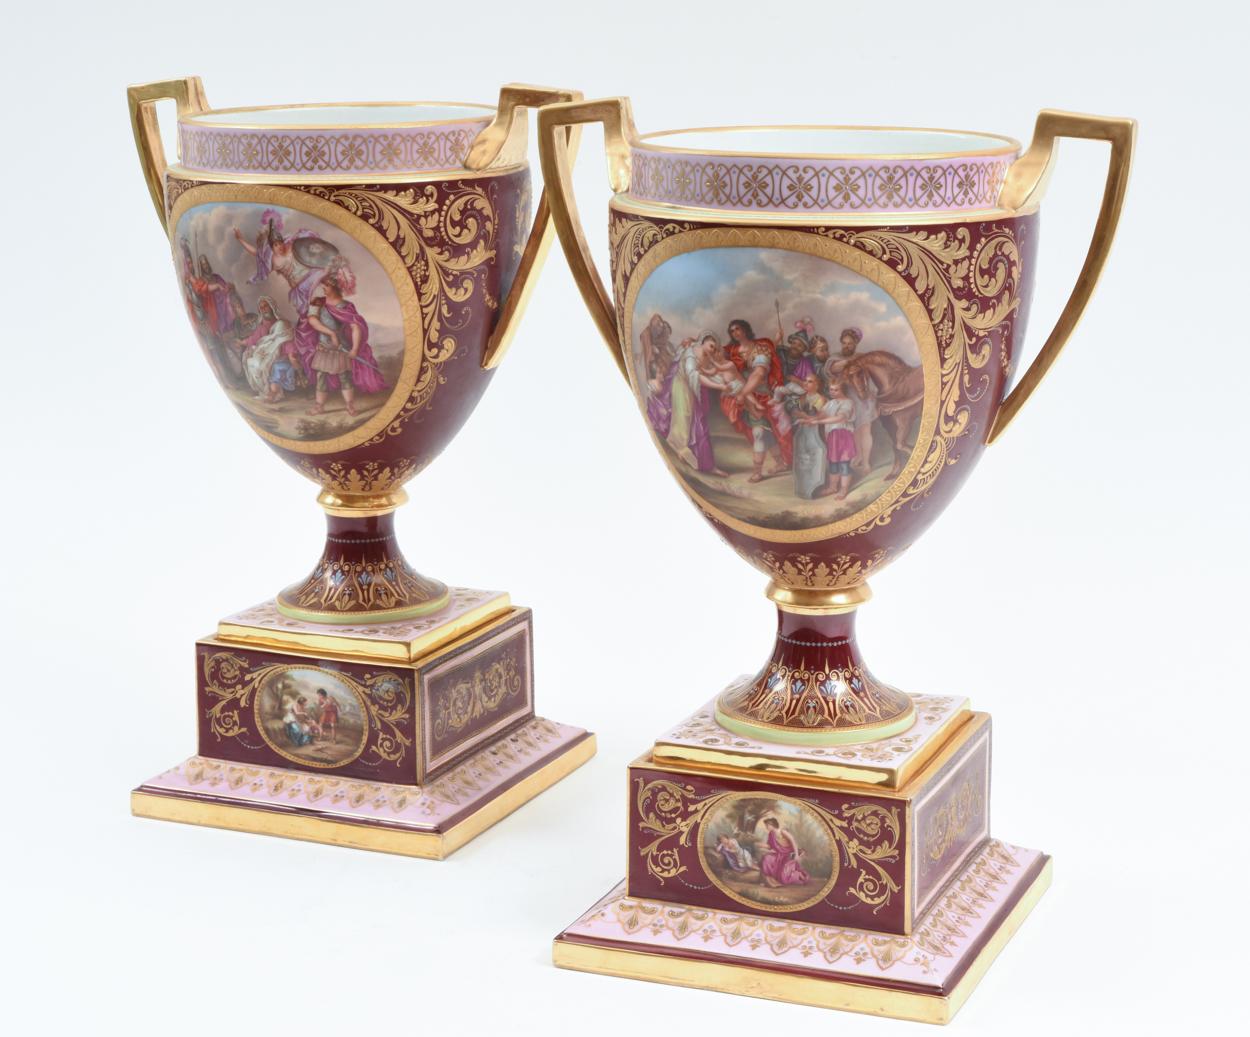 Antique hand painted pair of Royal Vienna Porcelain uncovered decorative piece / urn. Each piece have two gilt side handles with hand painted panels design details. Each one is set on squared hand painted design details holding base. Each piece /